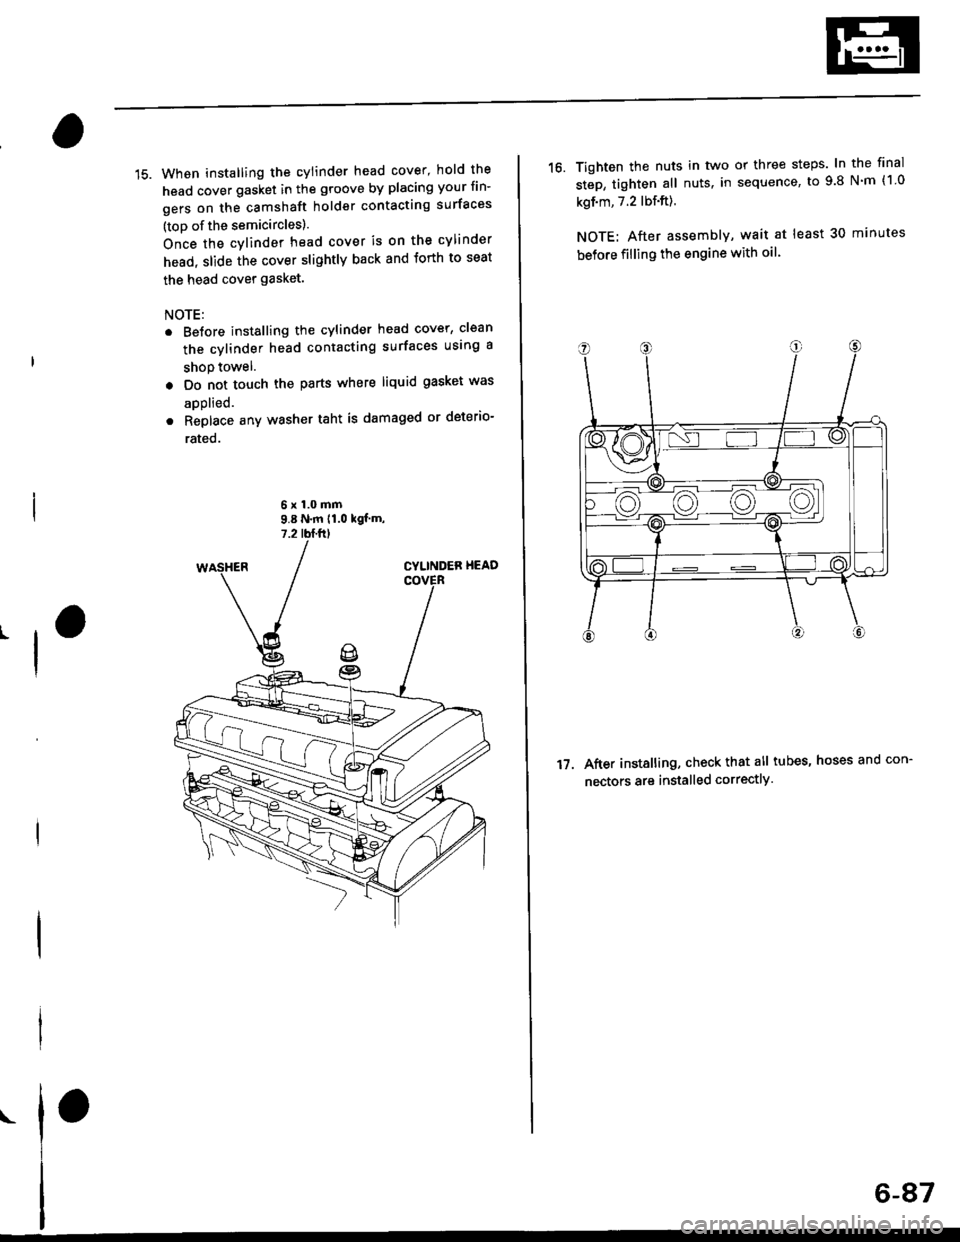 HONDA CIVIC 1996 6.G Workshop Manual 15. When installing the cylinder head cover, hold the
head cover gasket in the groove by placing your fin-
gers on the camshaft holder contacting surfaces
(toD of the semicircles).
Once the cylinder h